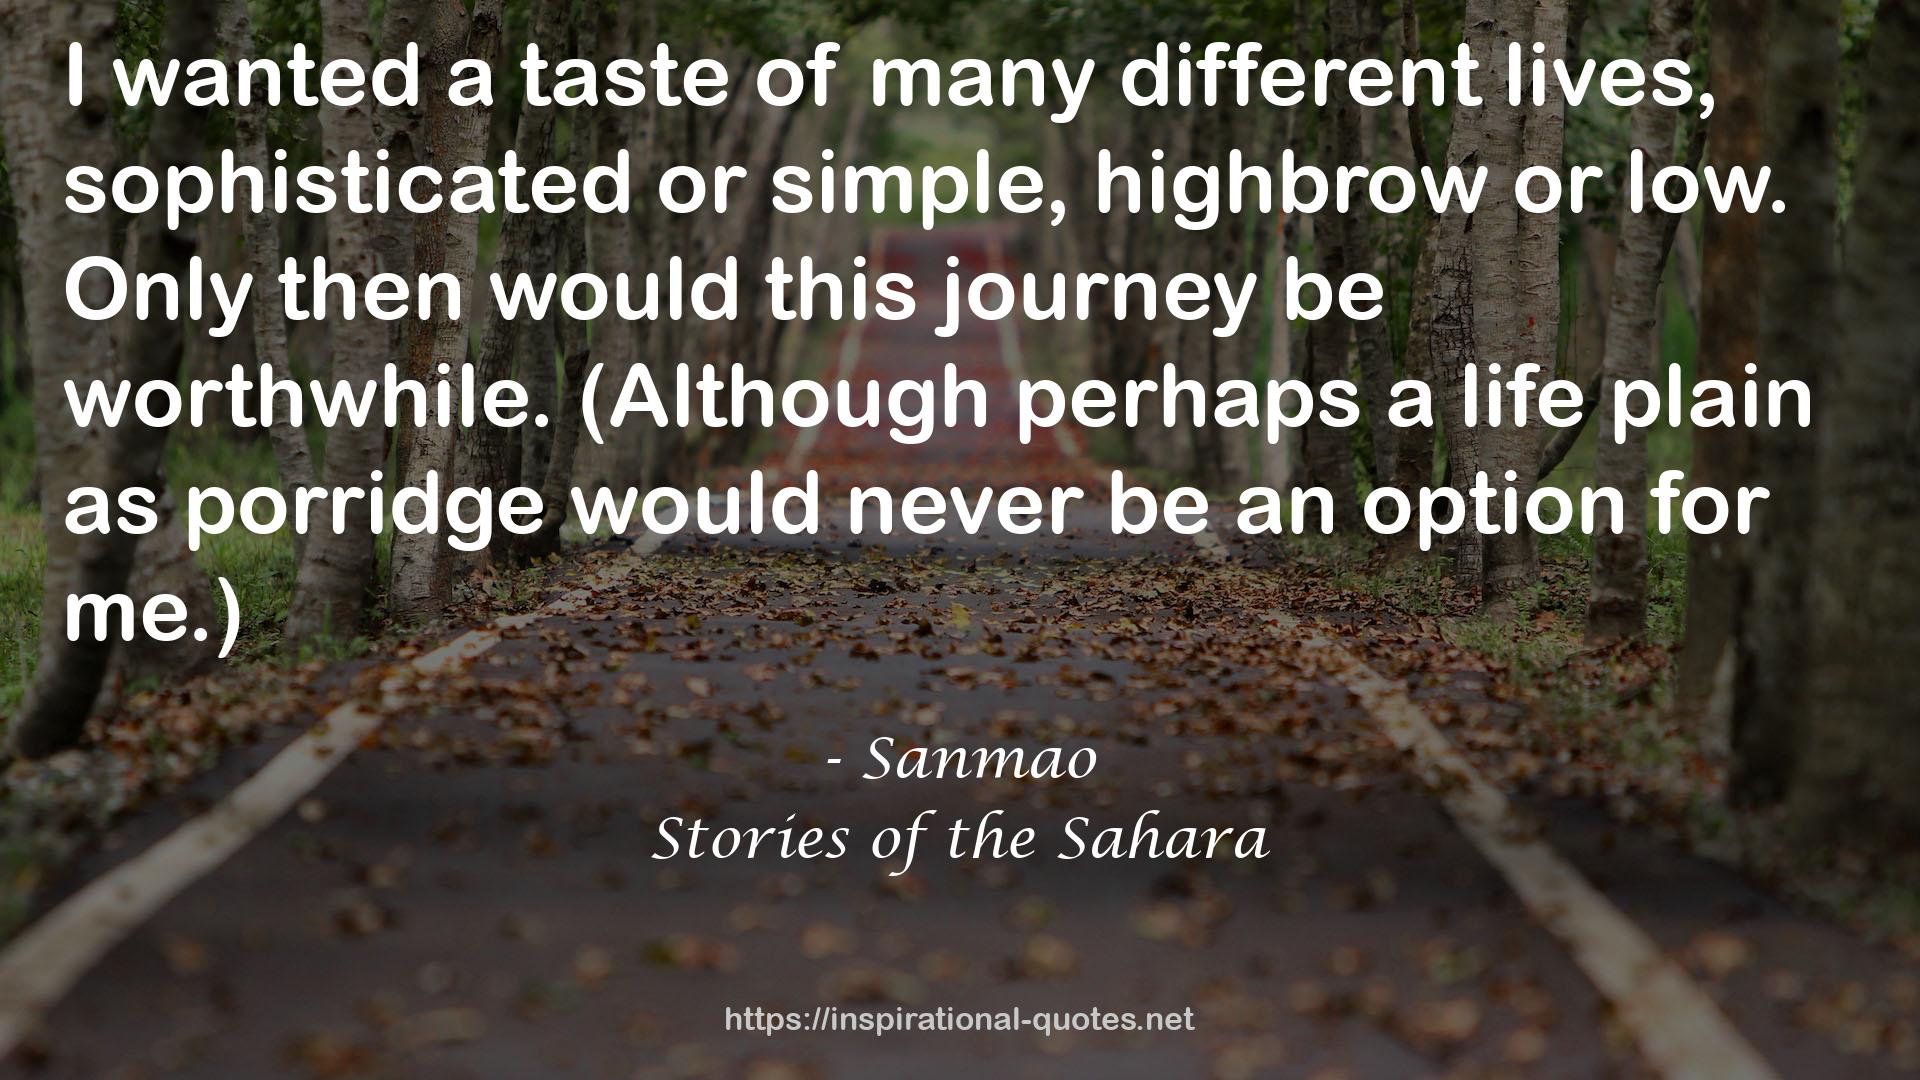 Stories of the Sahara QUOTES